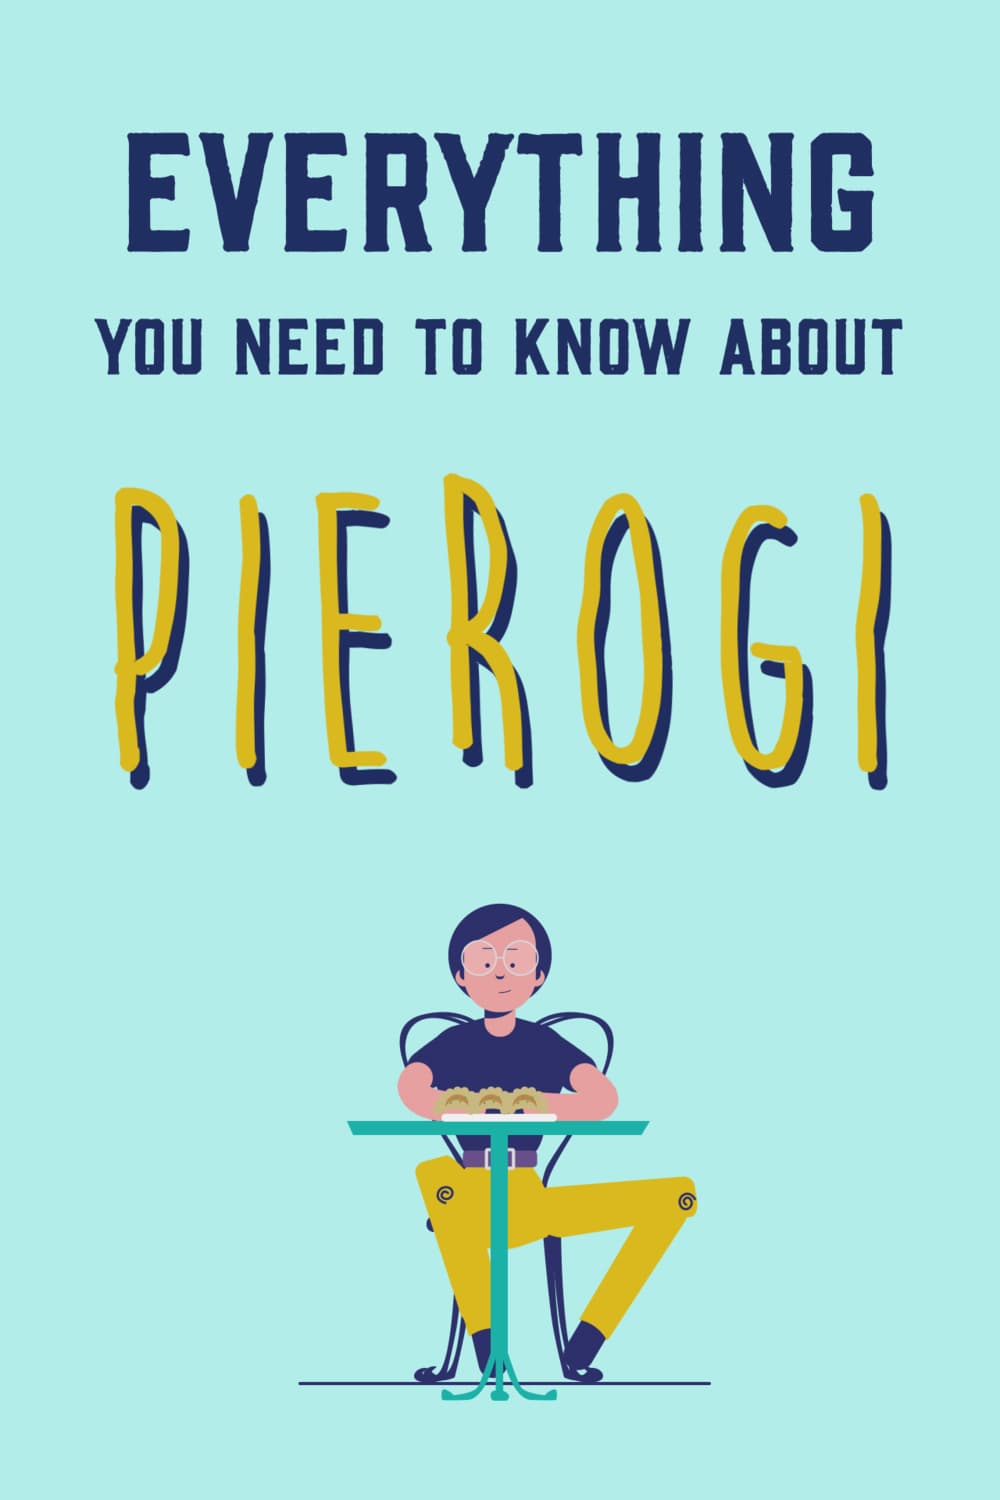 Everything You Need to Know About Pierogi